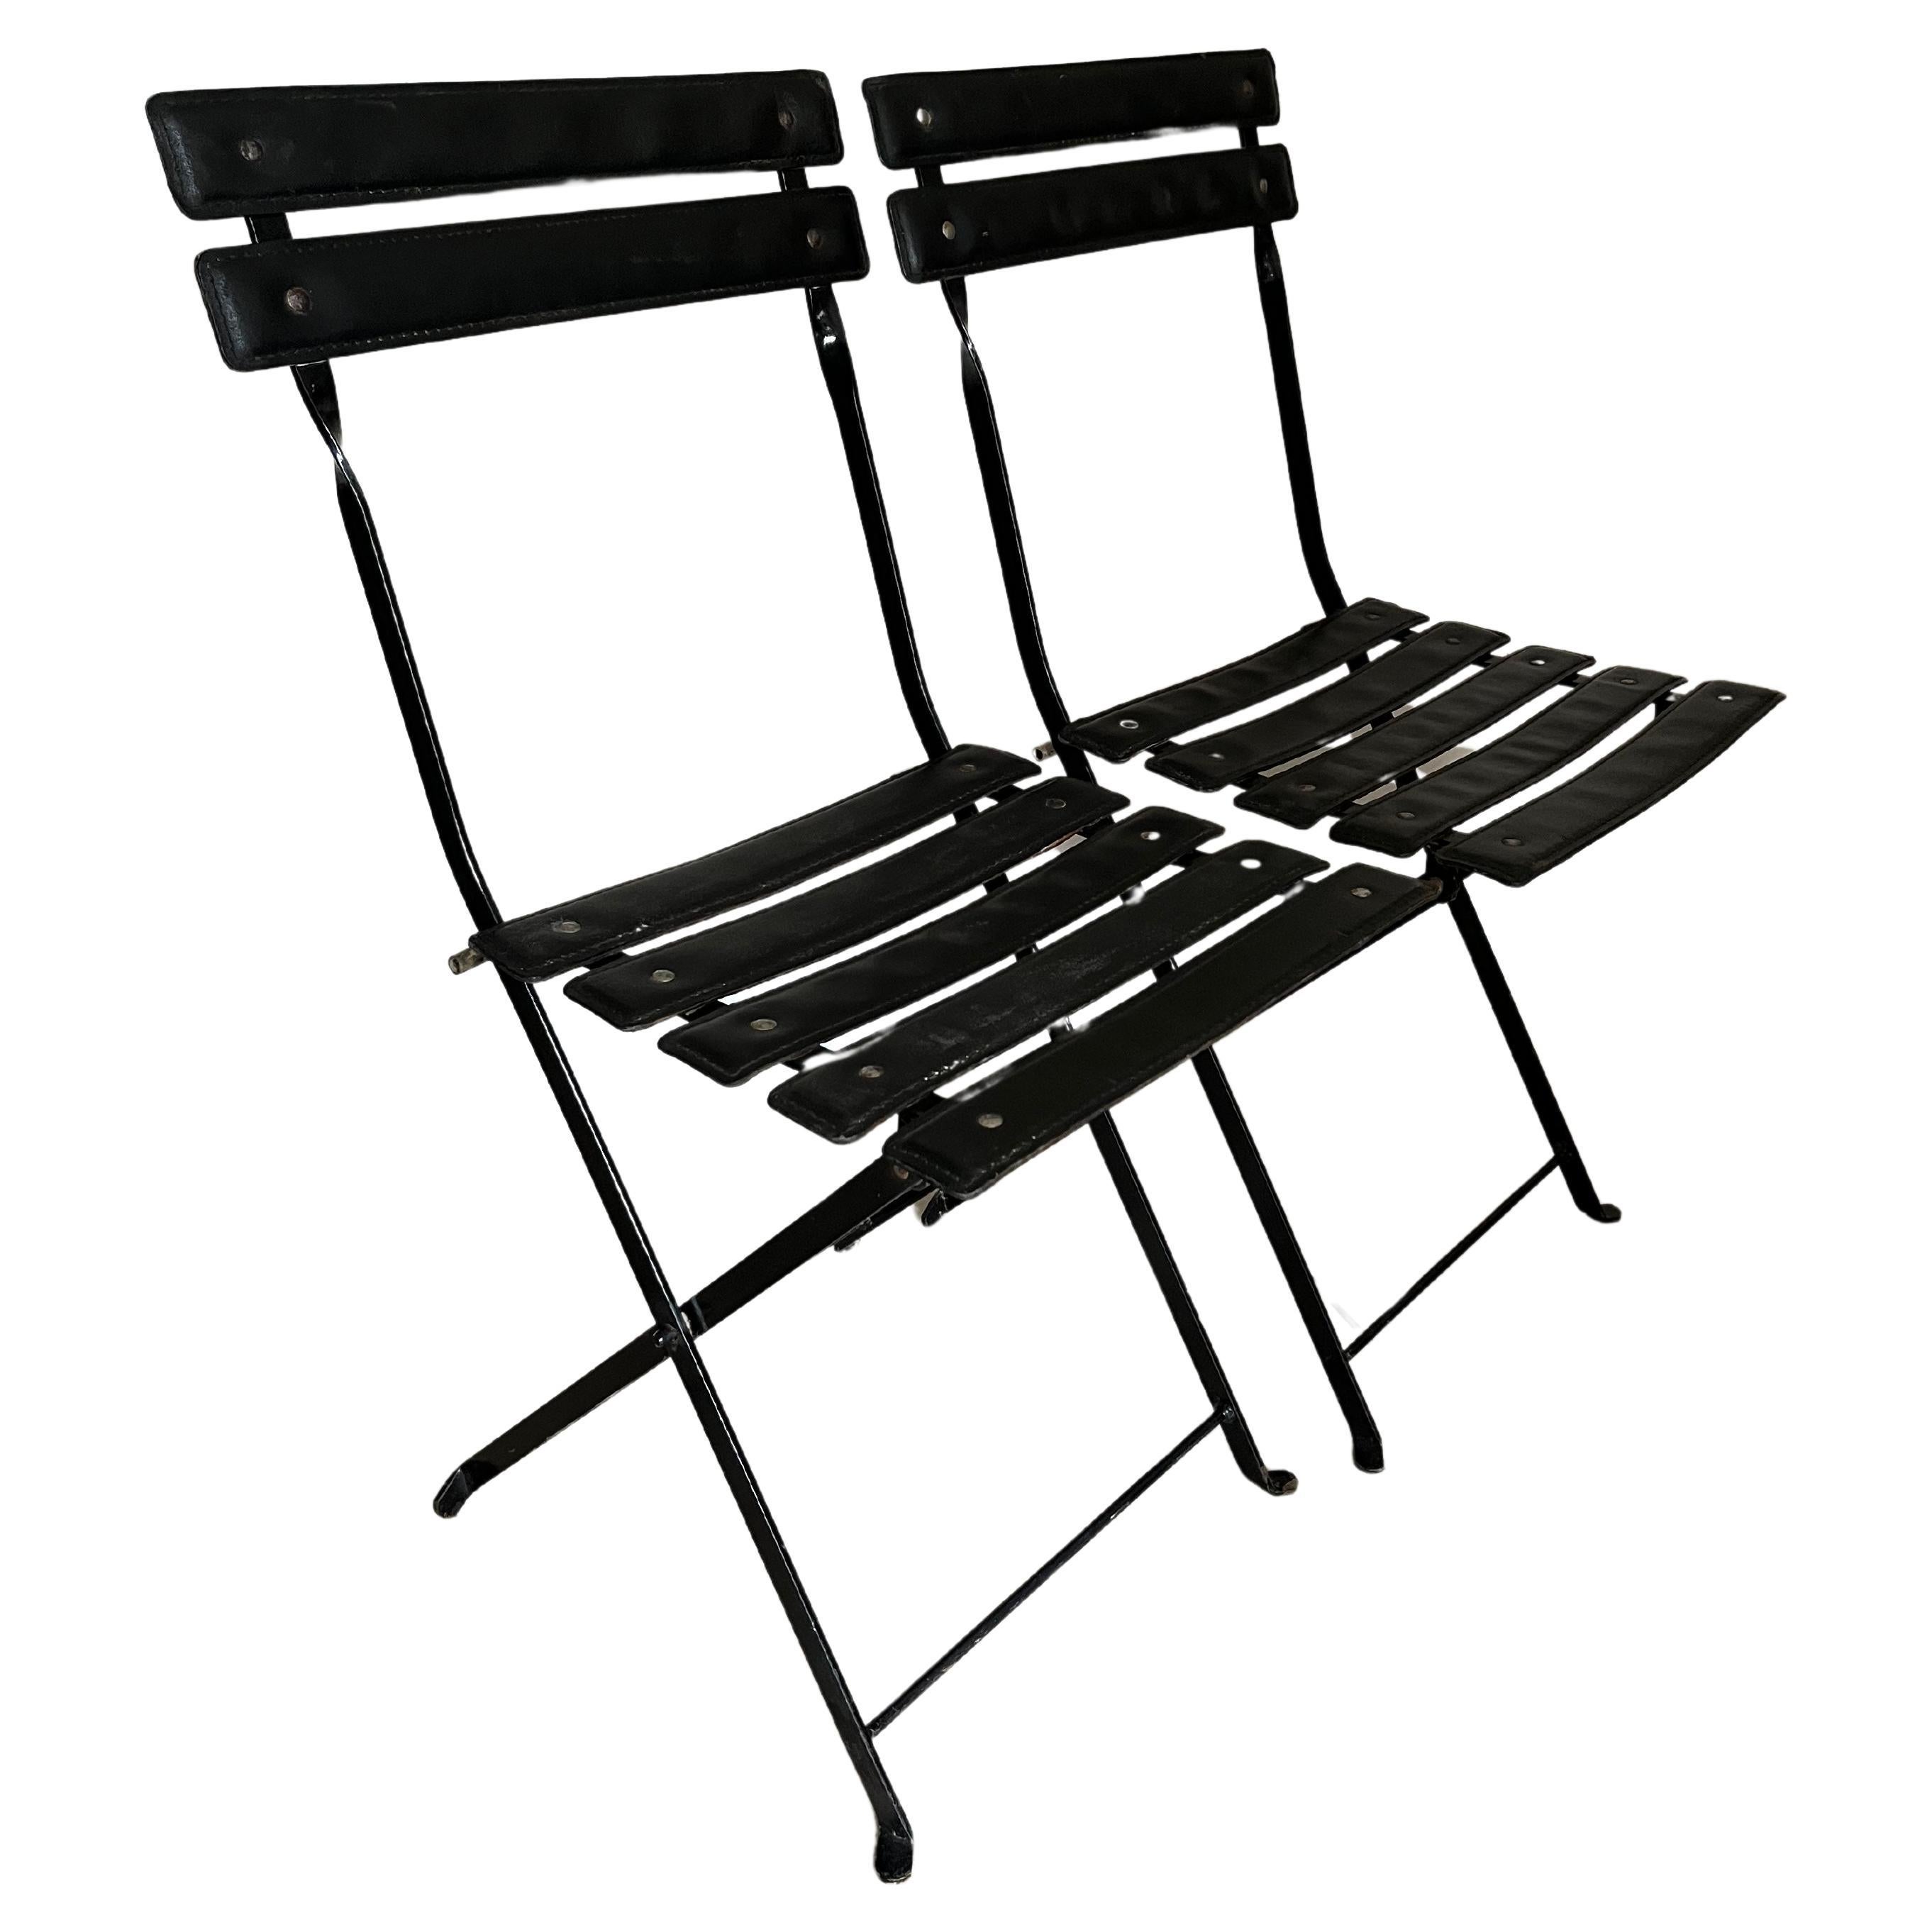 Pair of folding chairs in the manner of Jacques Adnet